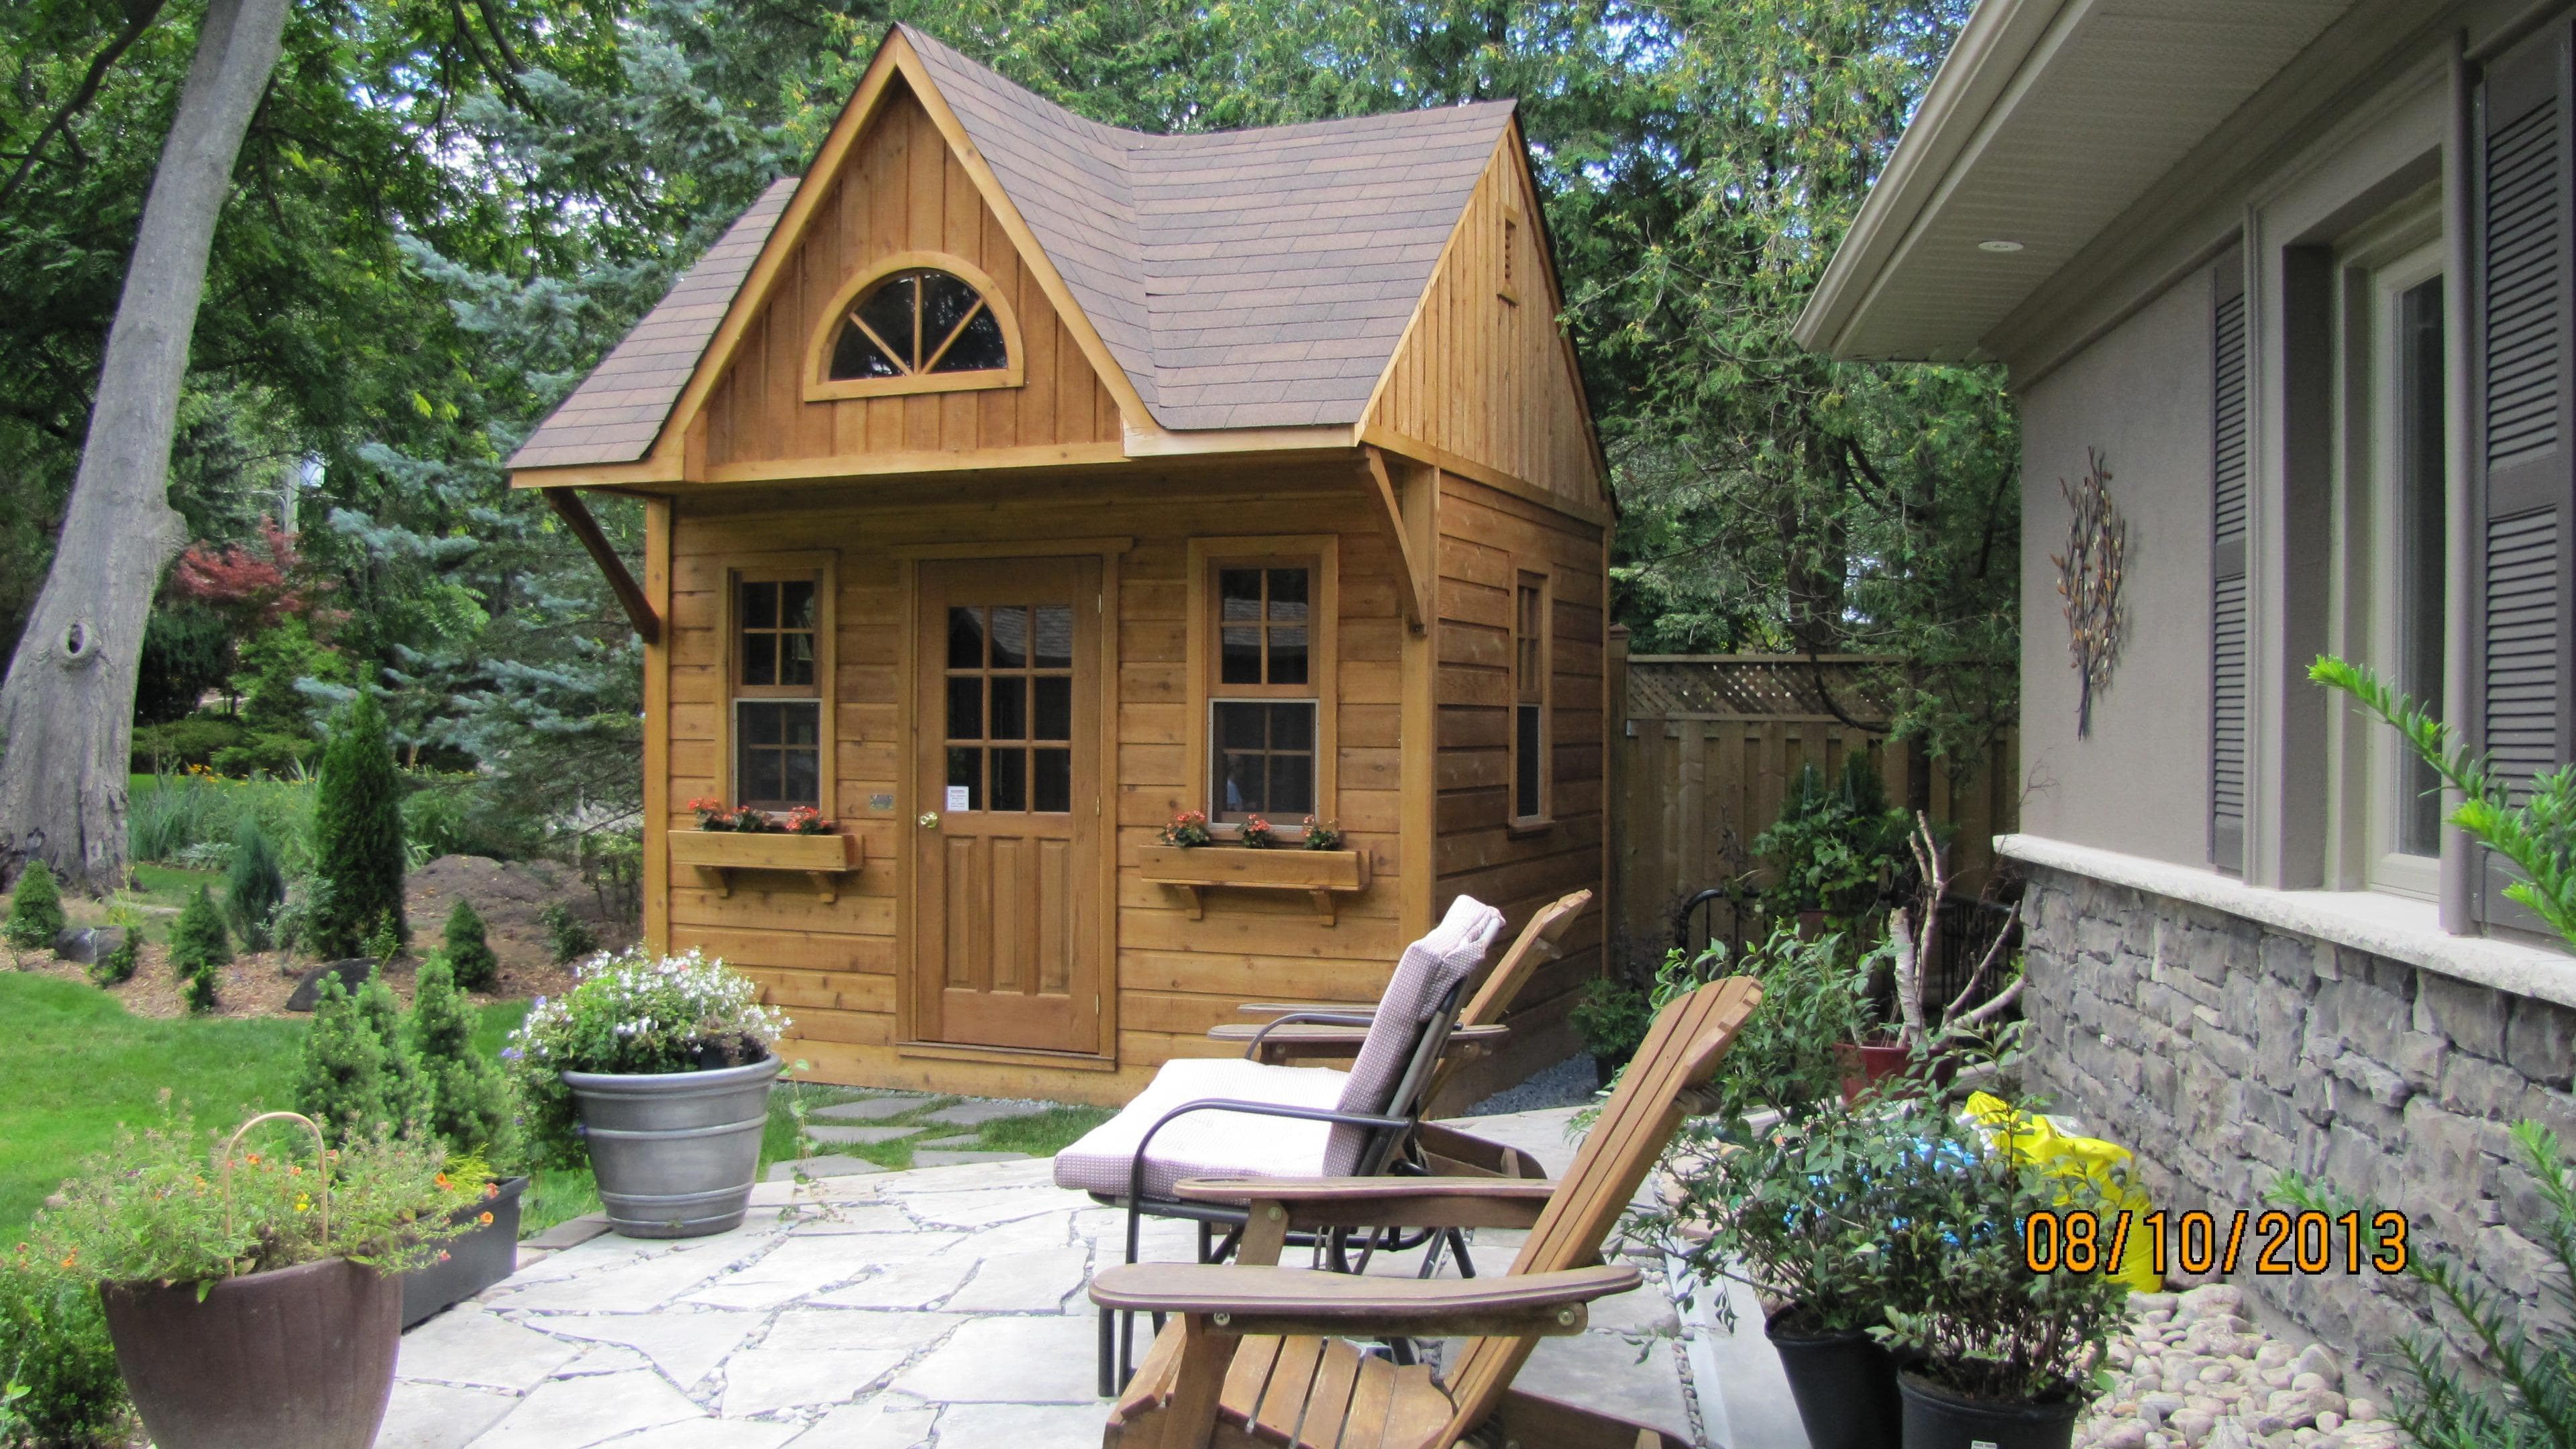 Custom bala bunkie cabin Kit 9 x 12 with 3ft front overhang in Toronto Ontario. ID number 206123-2